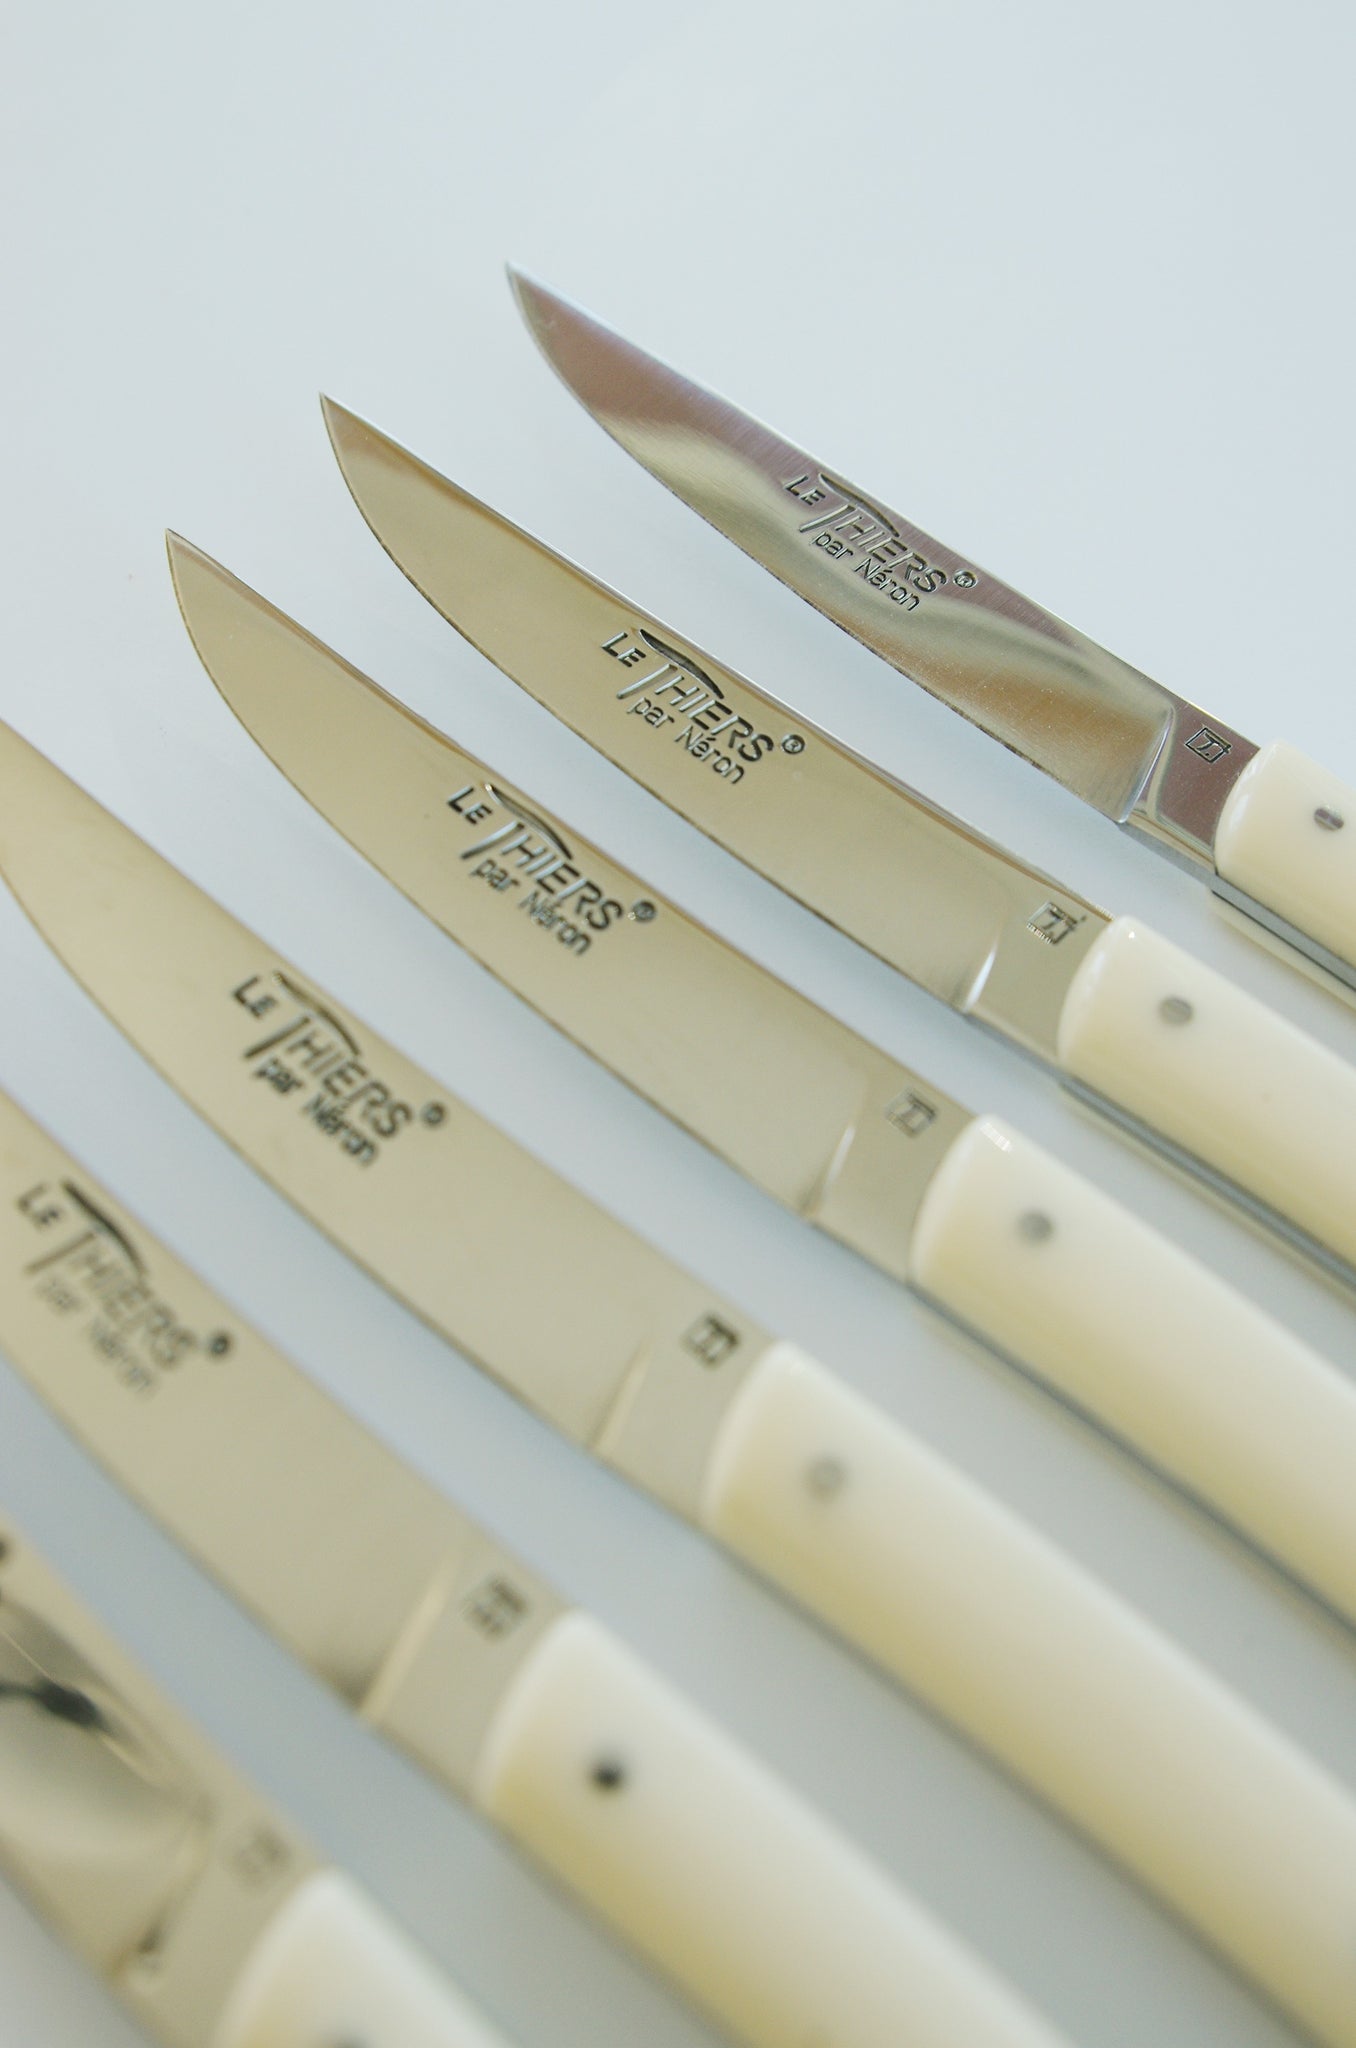 Row of knives that read 'Le Thiers par Neron' with ivory colored handles.